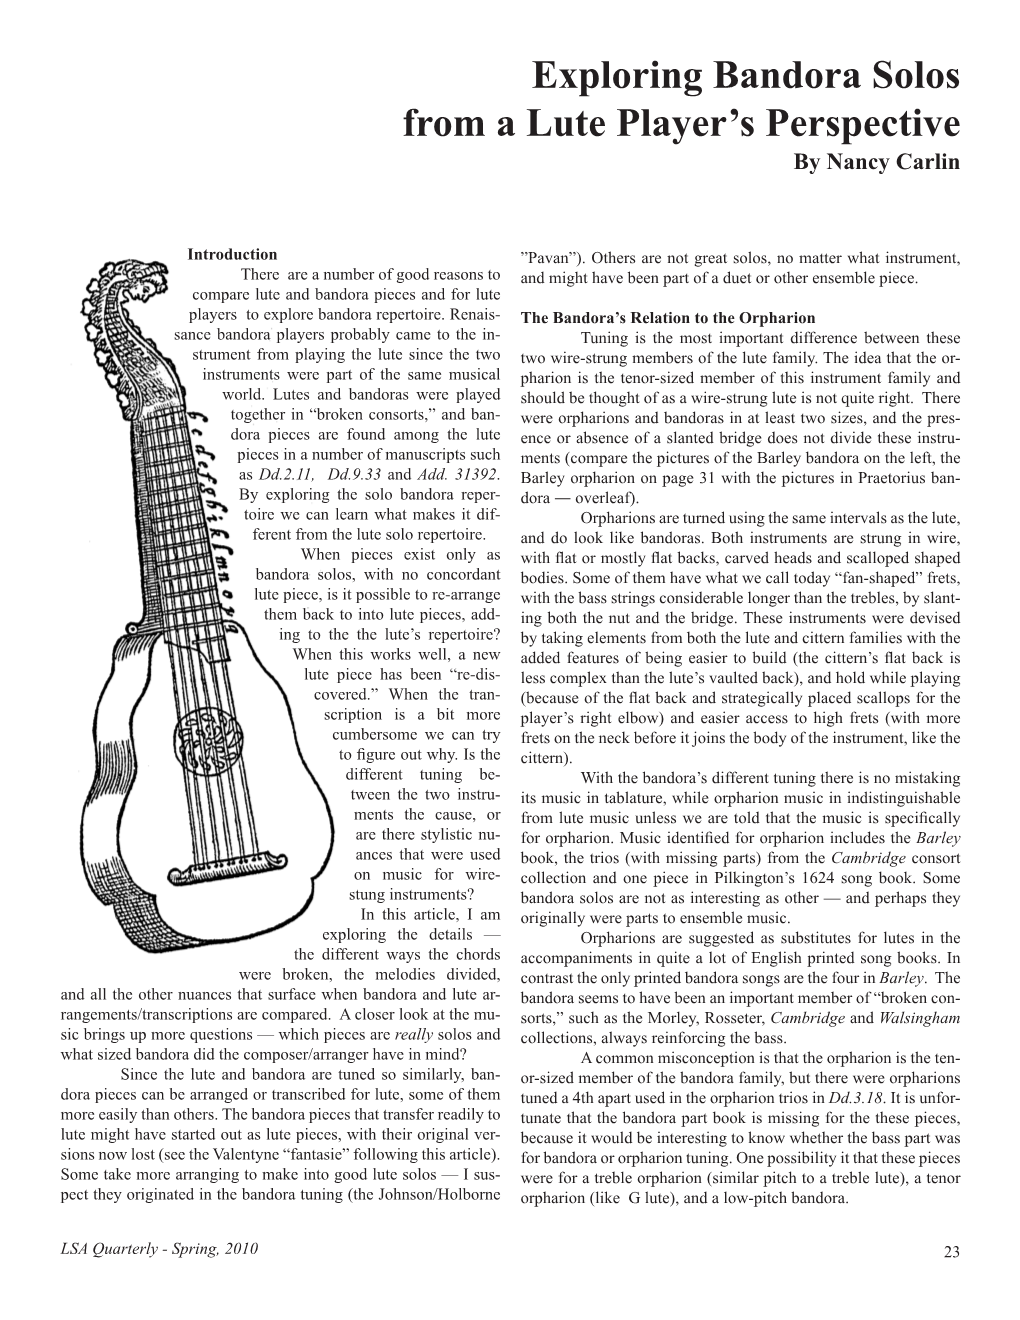 "Exploring Bandora Solos from a Lute Player's Perspective," LSA Quarterly